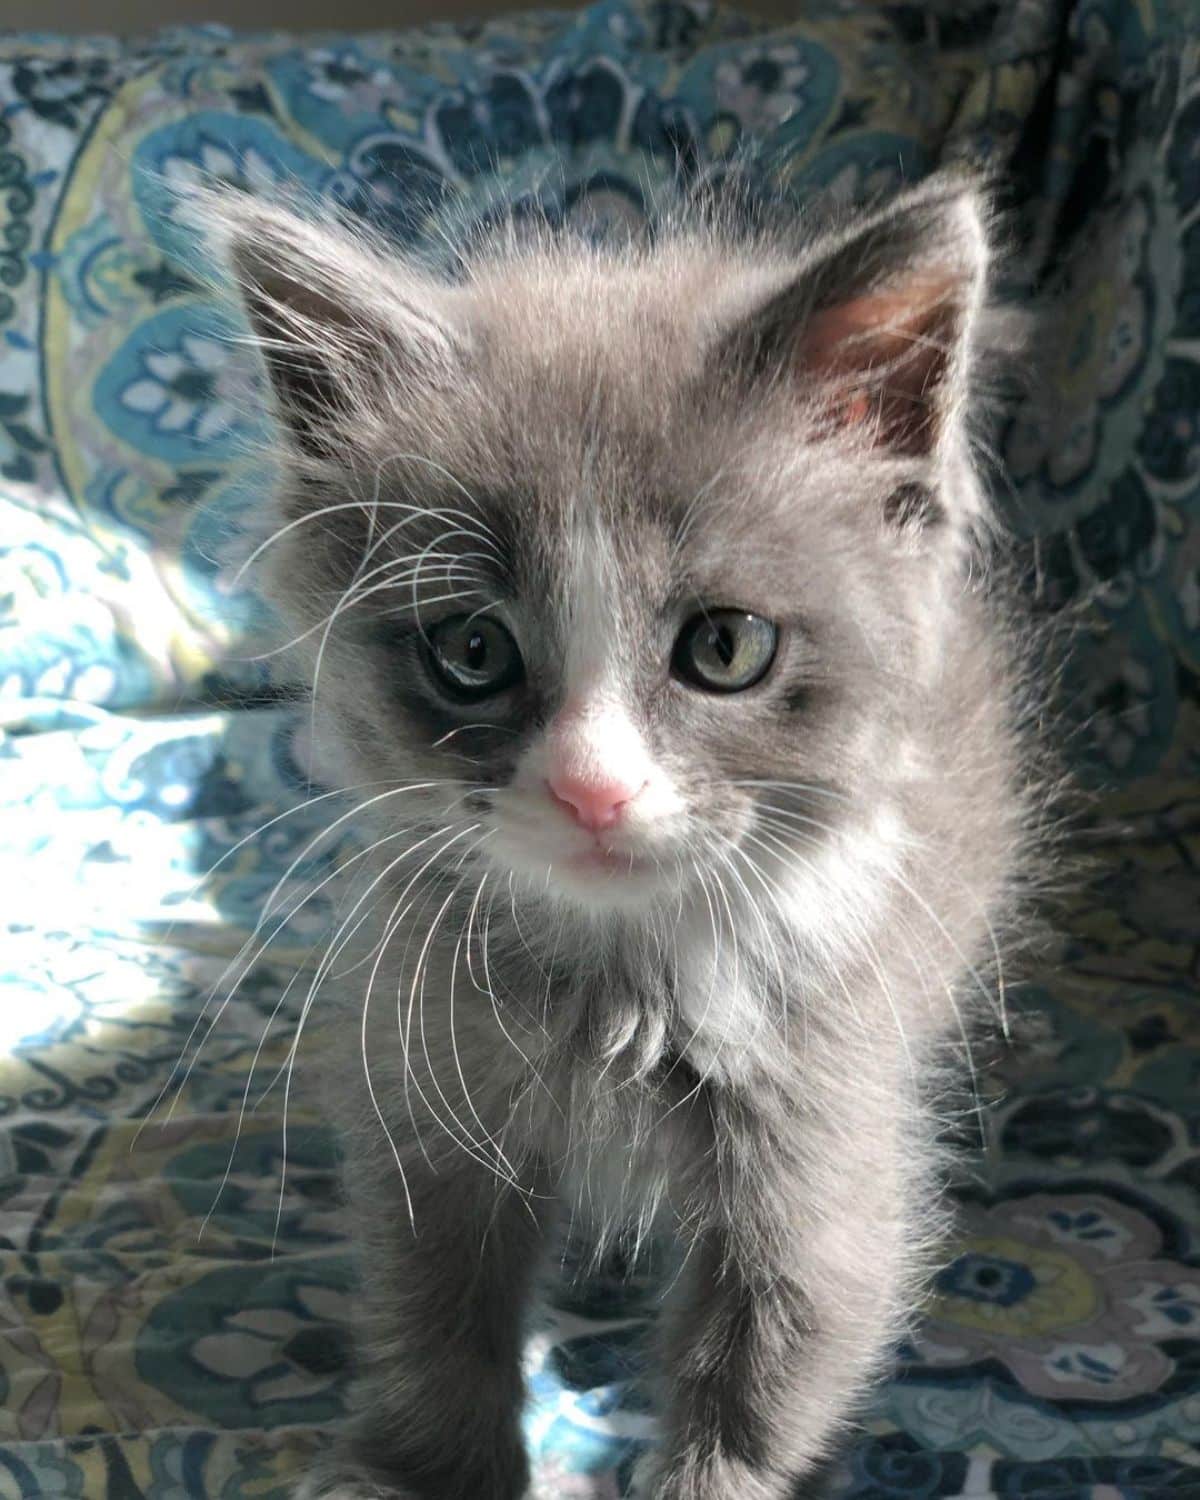 An adorable gray-whte maine coon kitten on a couch.